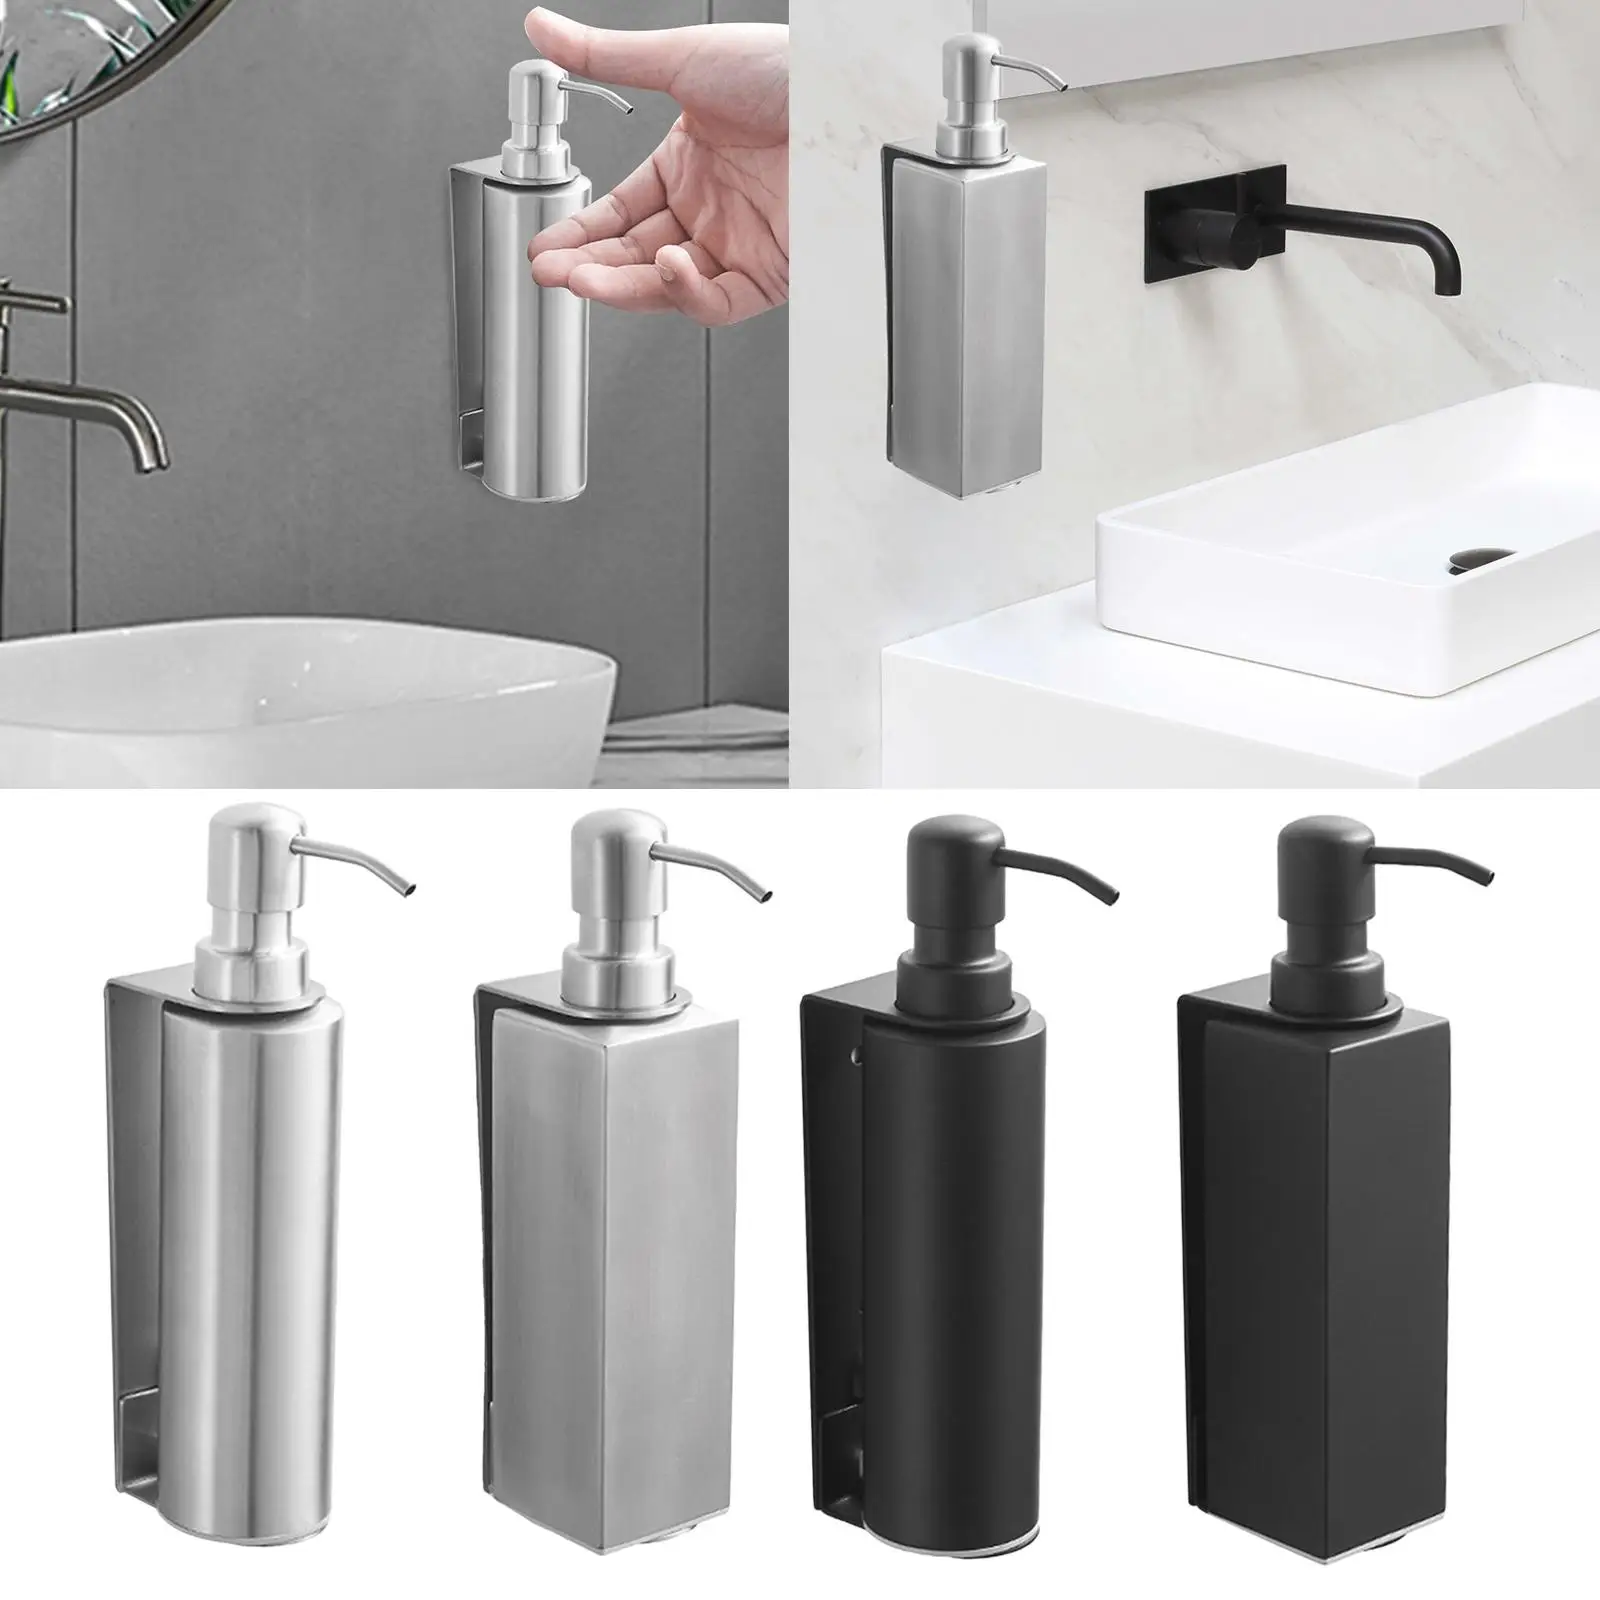 Soap Dispenser Stainless Steel 1 Piece for Hotel Countertop Dishwashing Soap